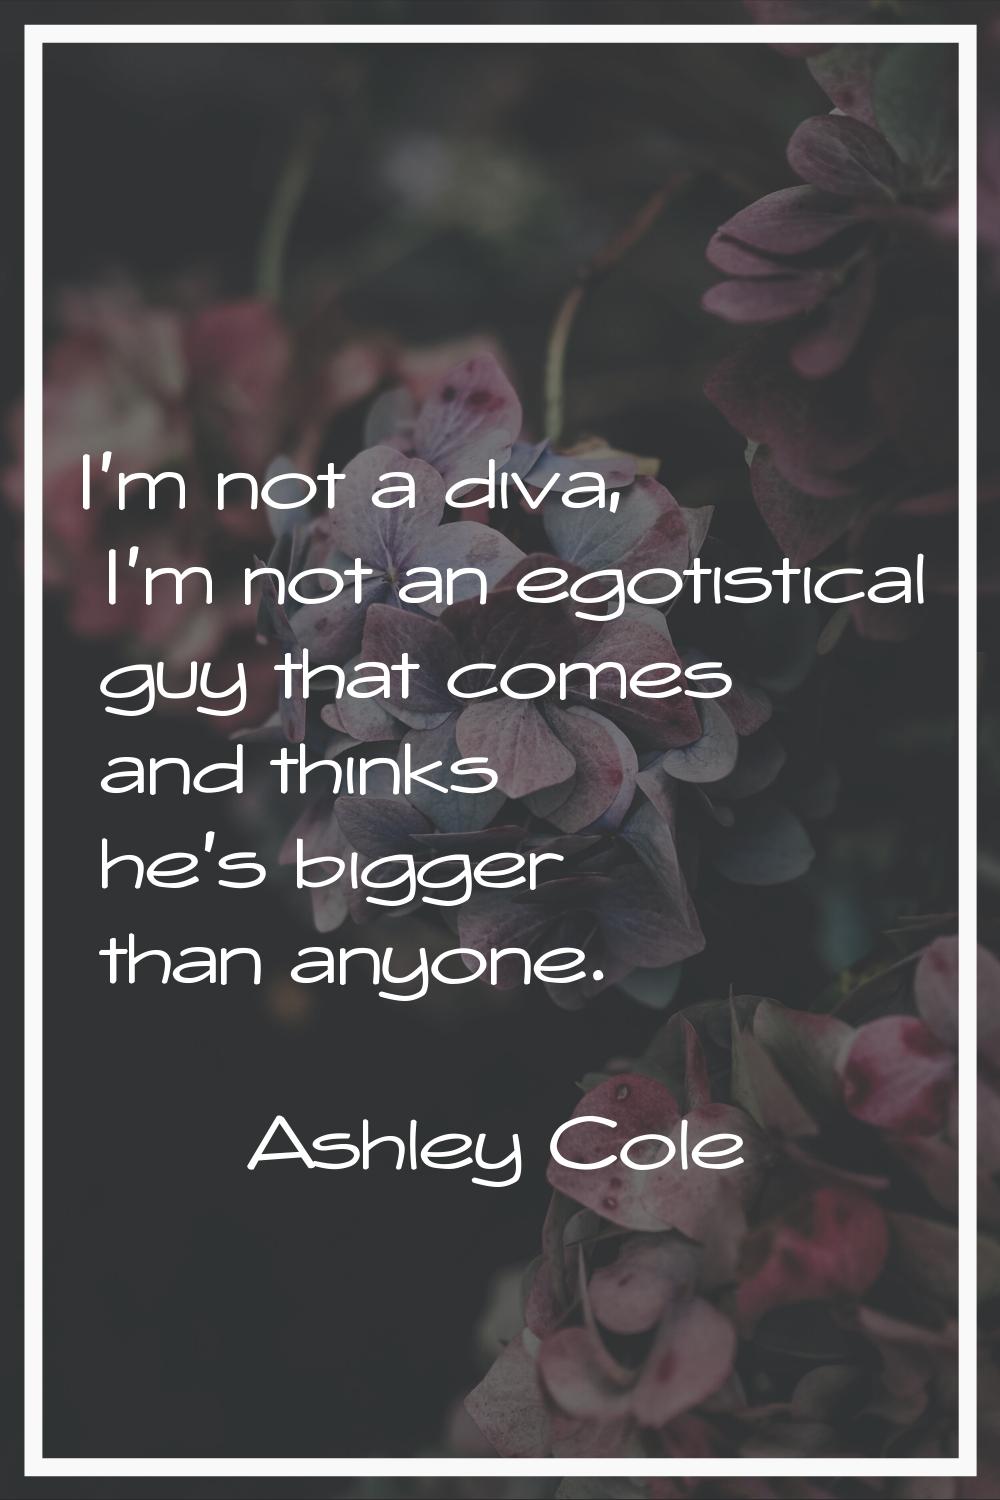 I'm not a diva, I'm not an egotistical guy that comes and thinks he's bigger than anyone.